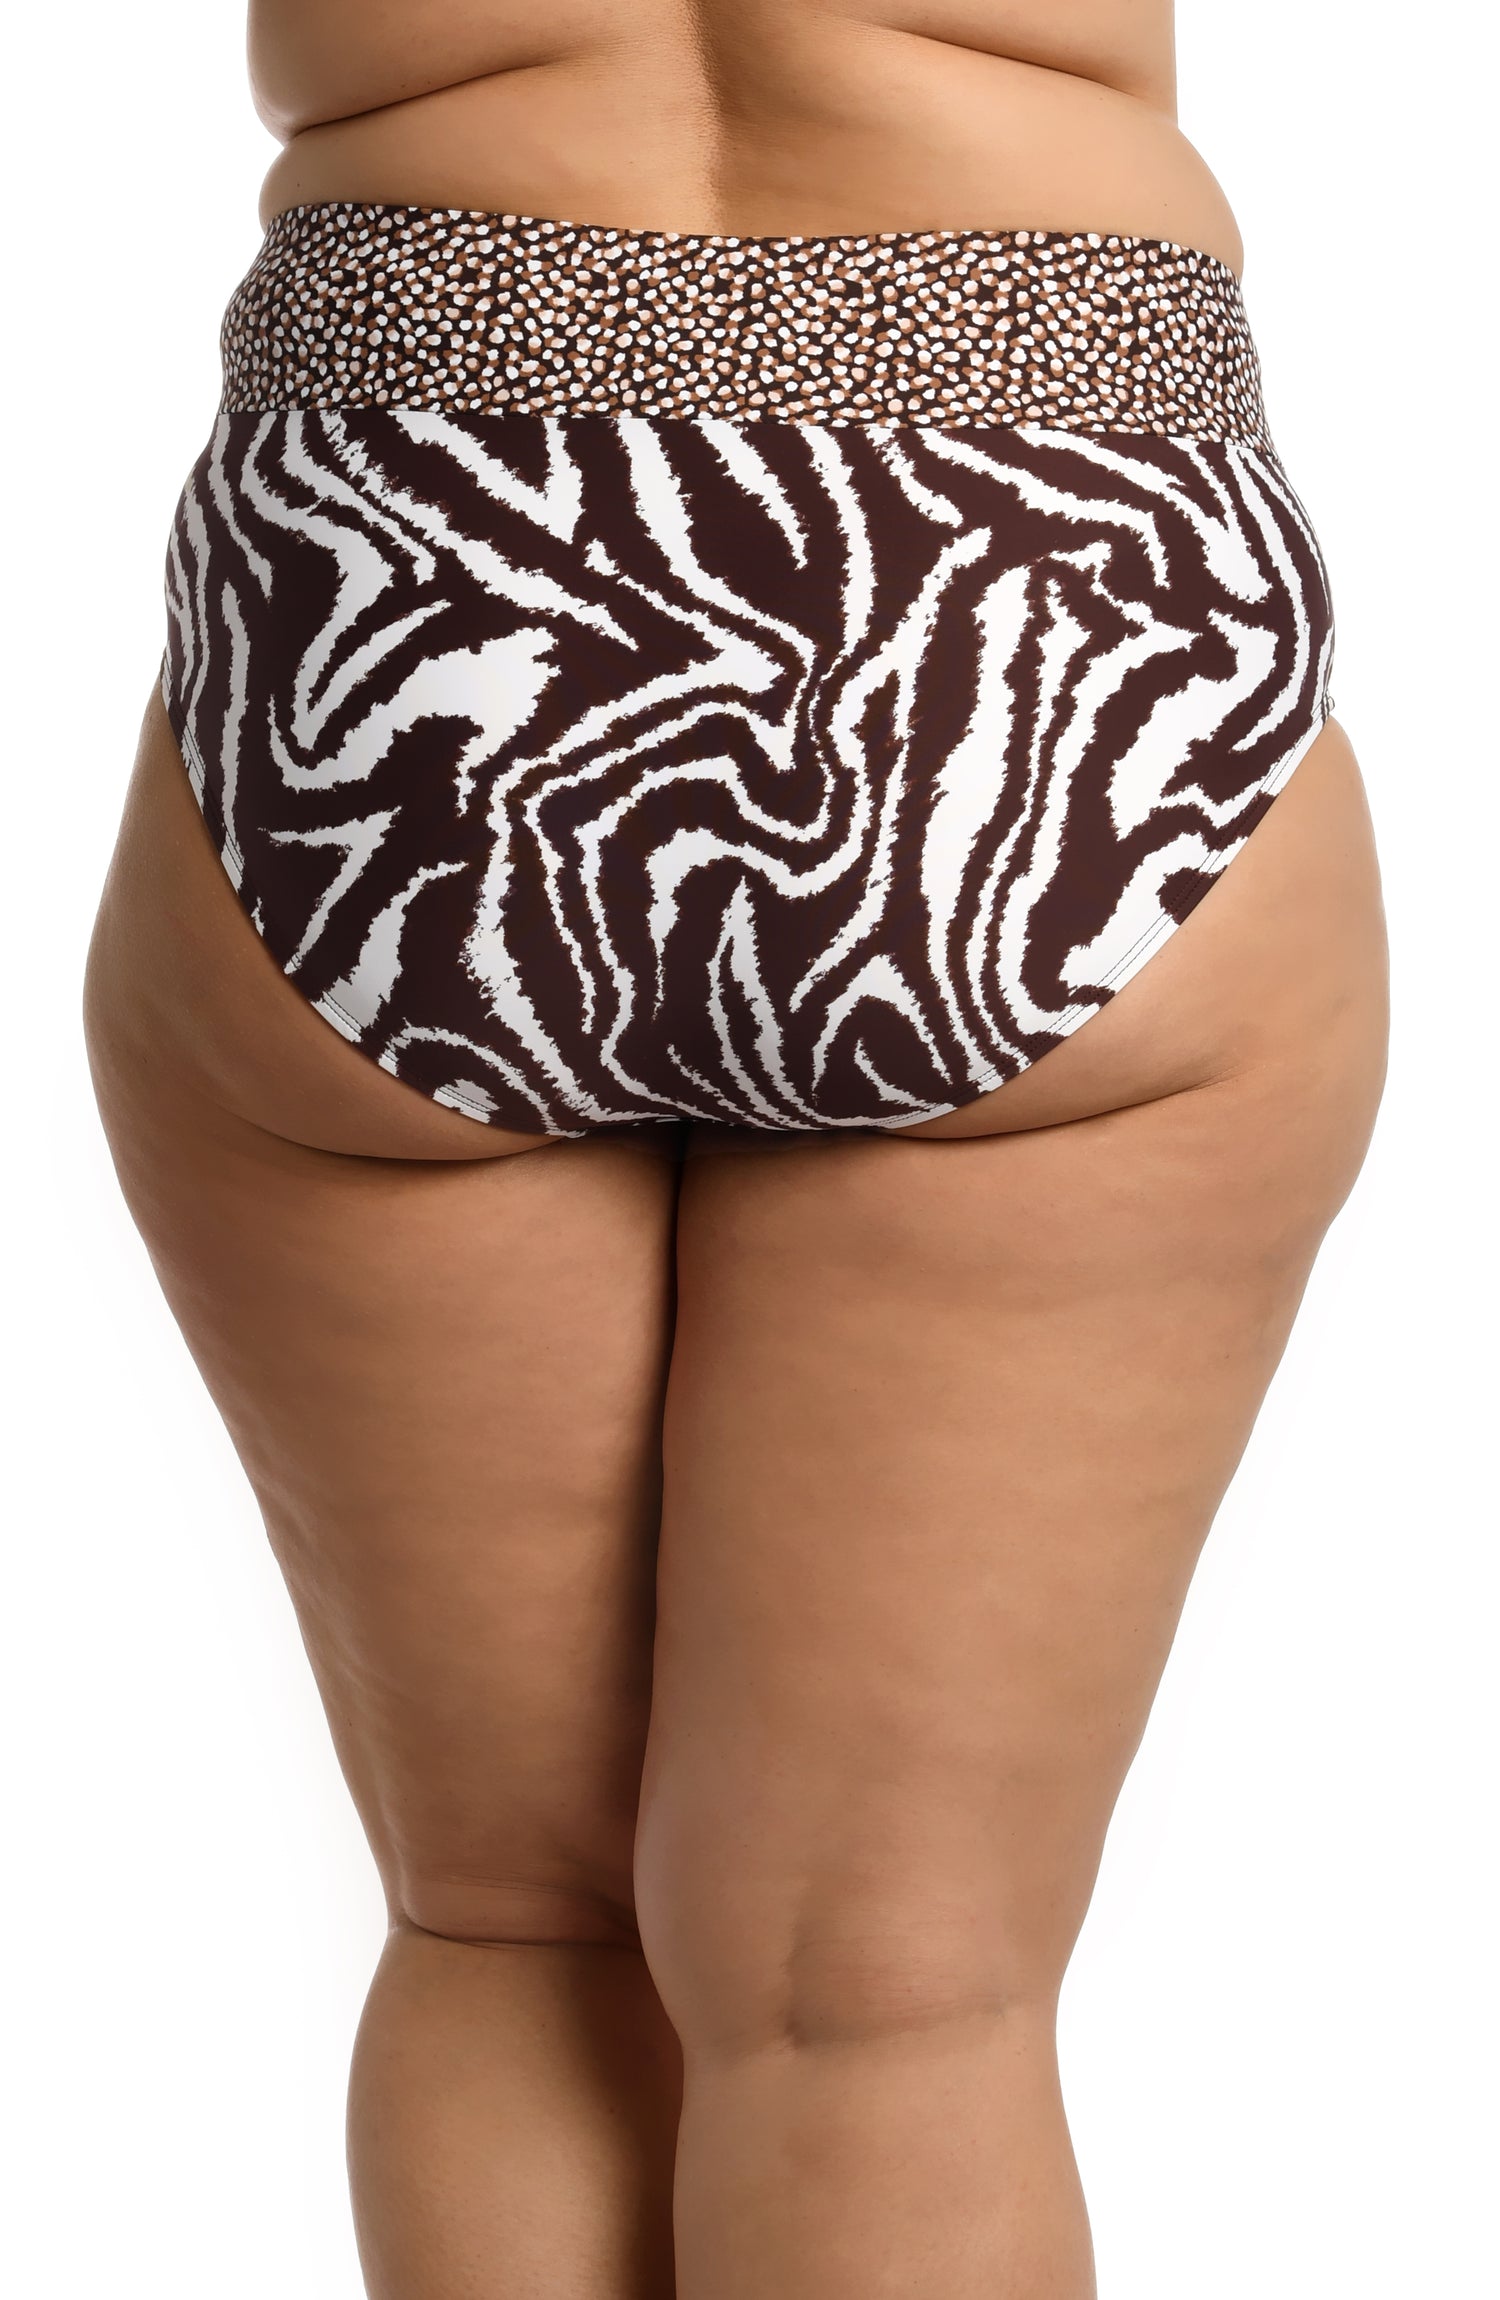 Model is wearing a java colored animal printed crossover high waisted bottom in our Fierce Lines collection!